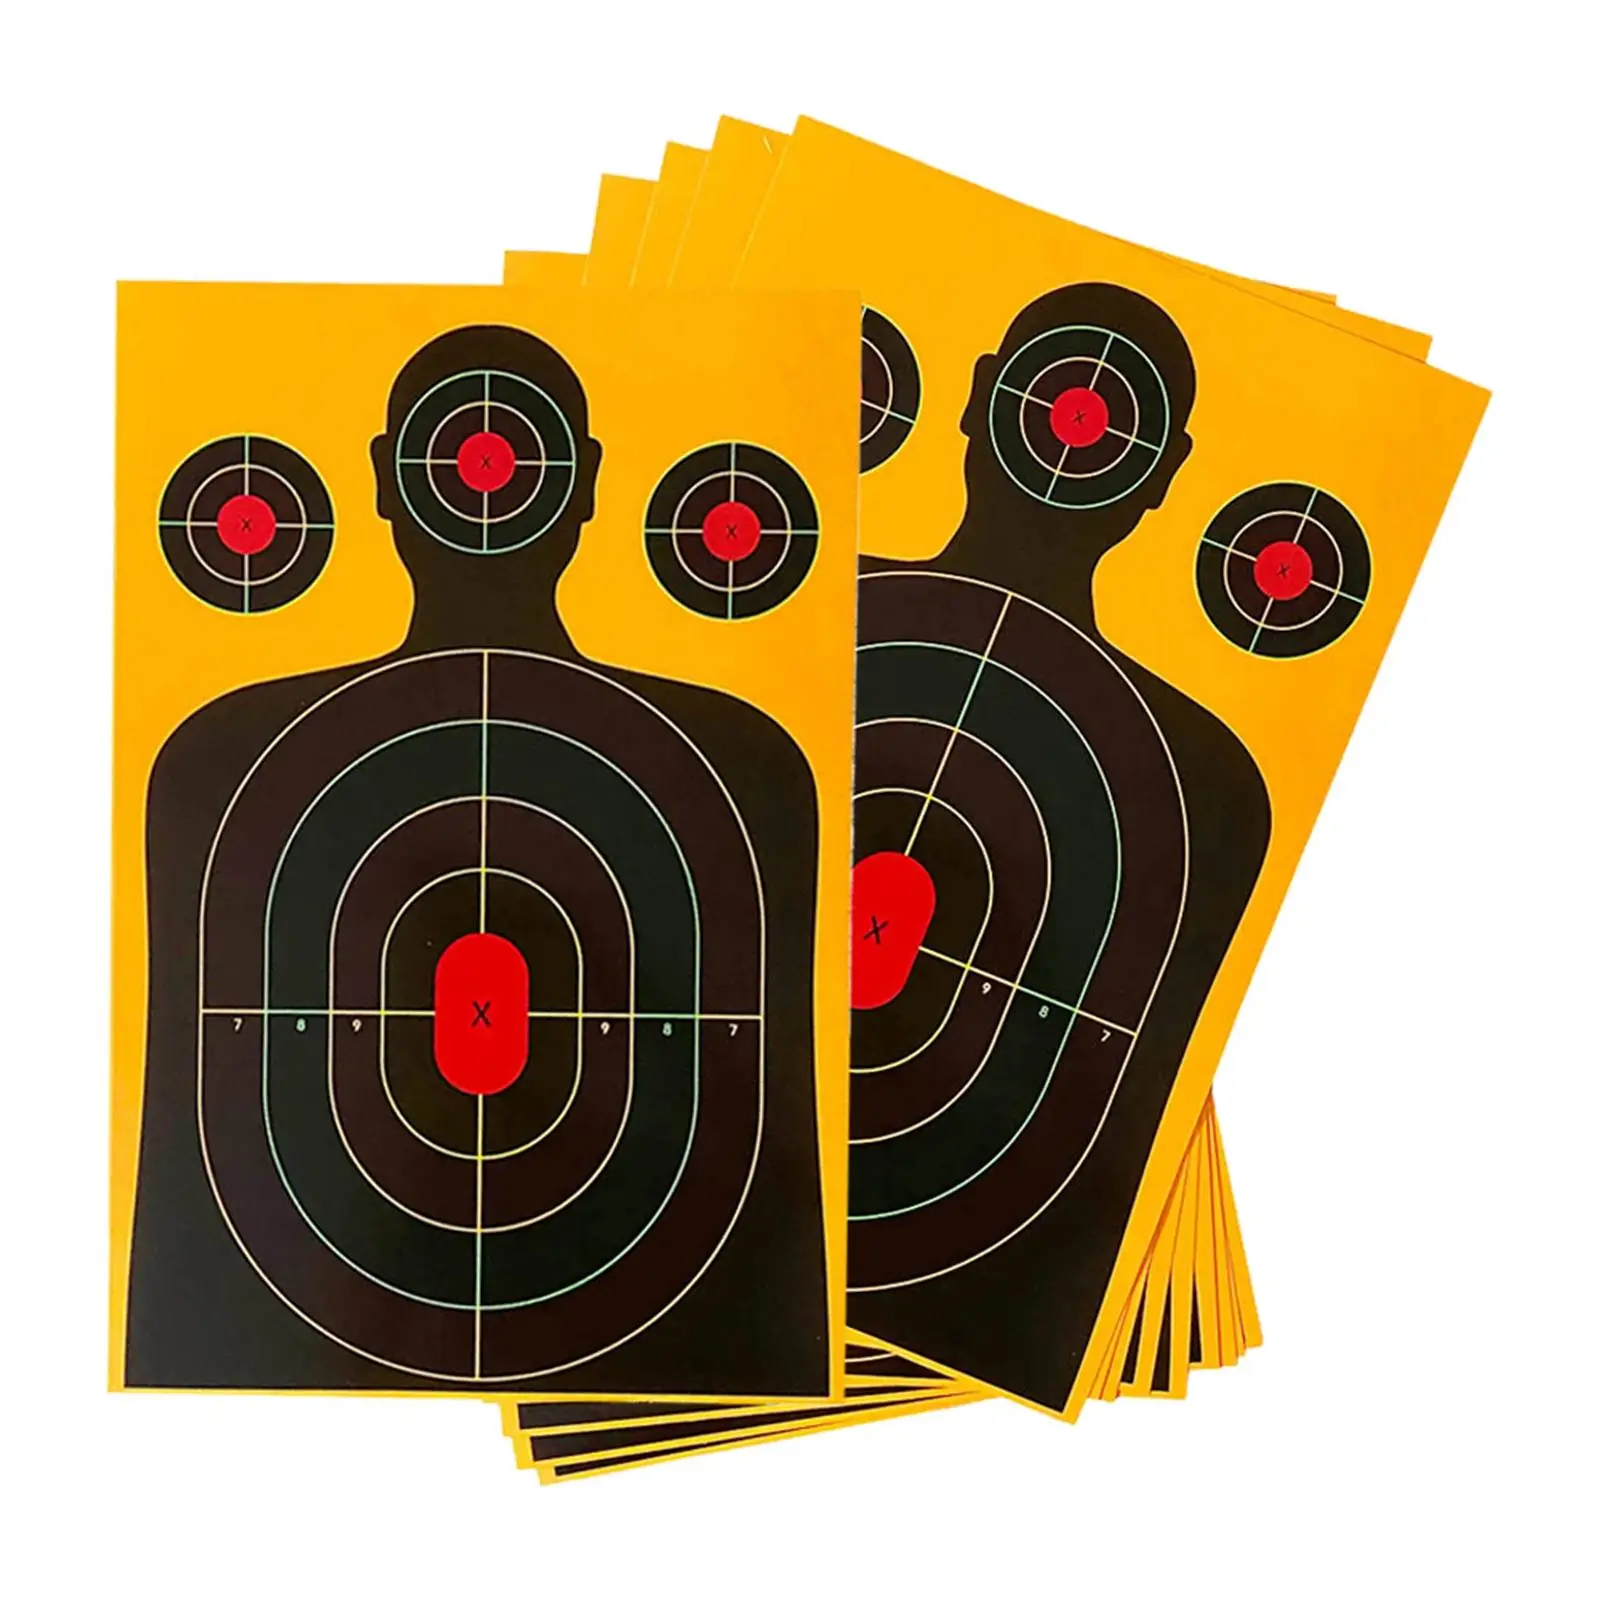 10x Silhouette Target Wargame without Stand Hunting Practice Hunting Training Catapults Sport Letter Partition Training Target